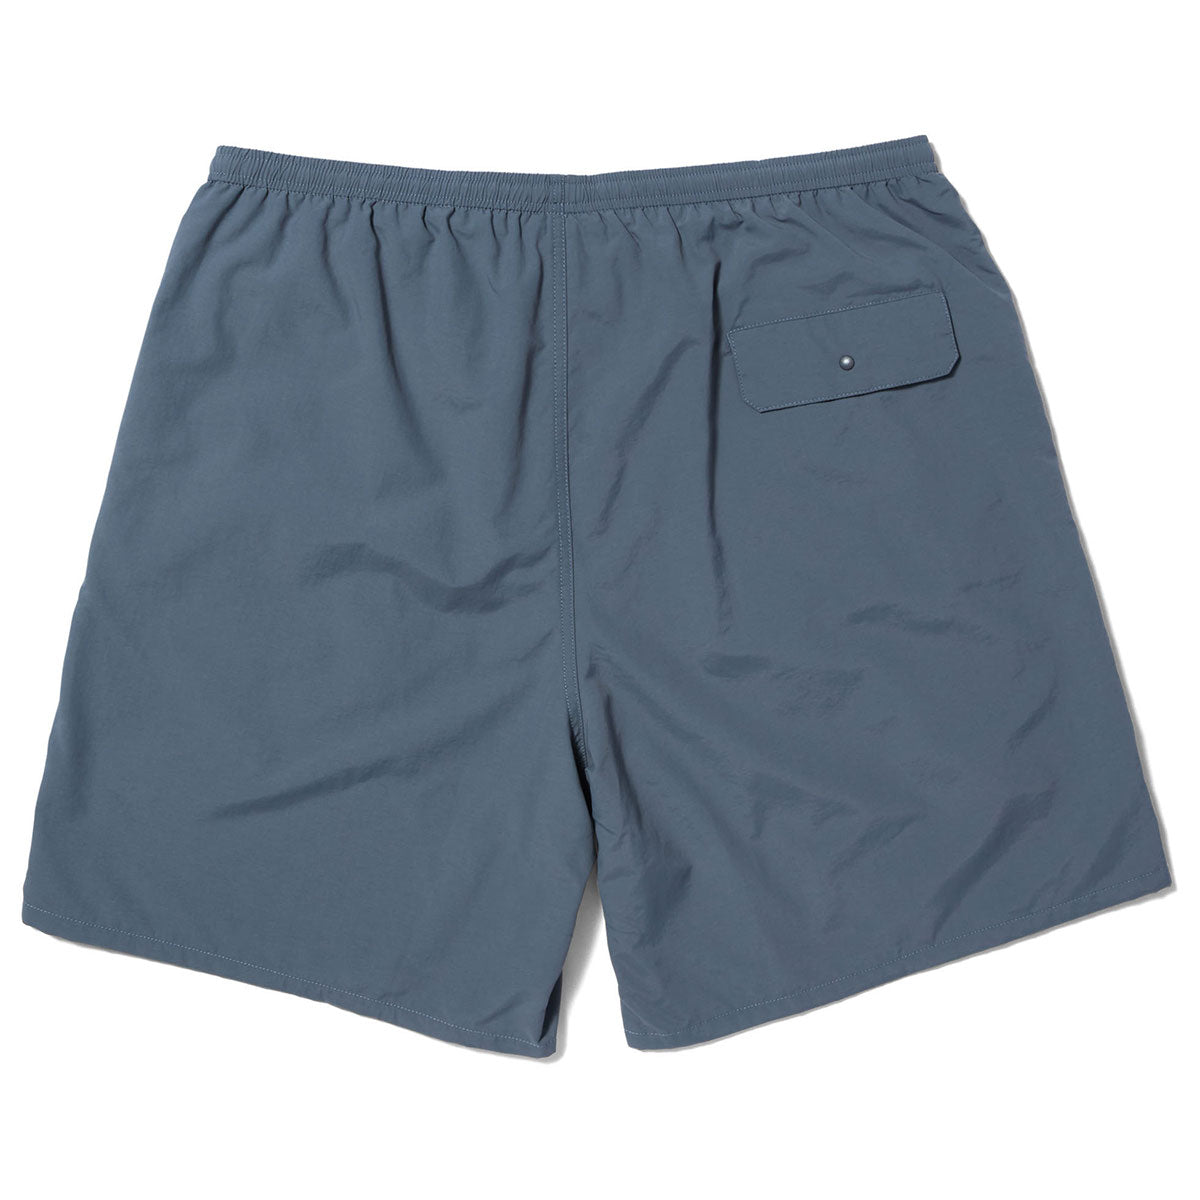 HUF Reservoir Dwr Easy Shorts - Frost Gray image 2